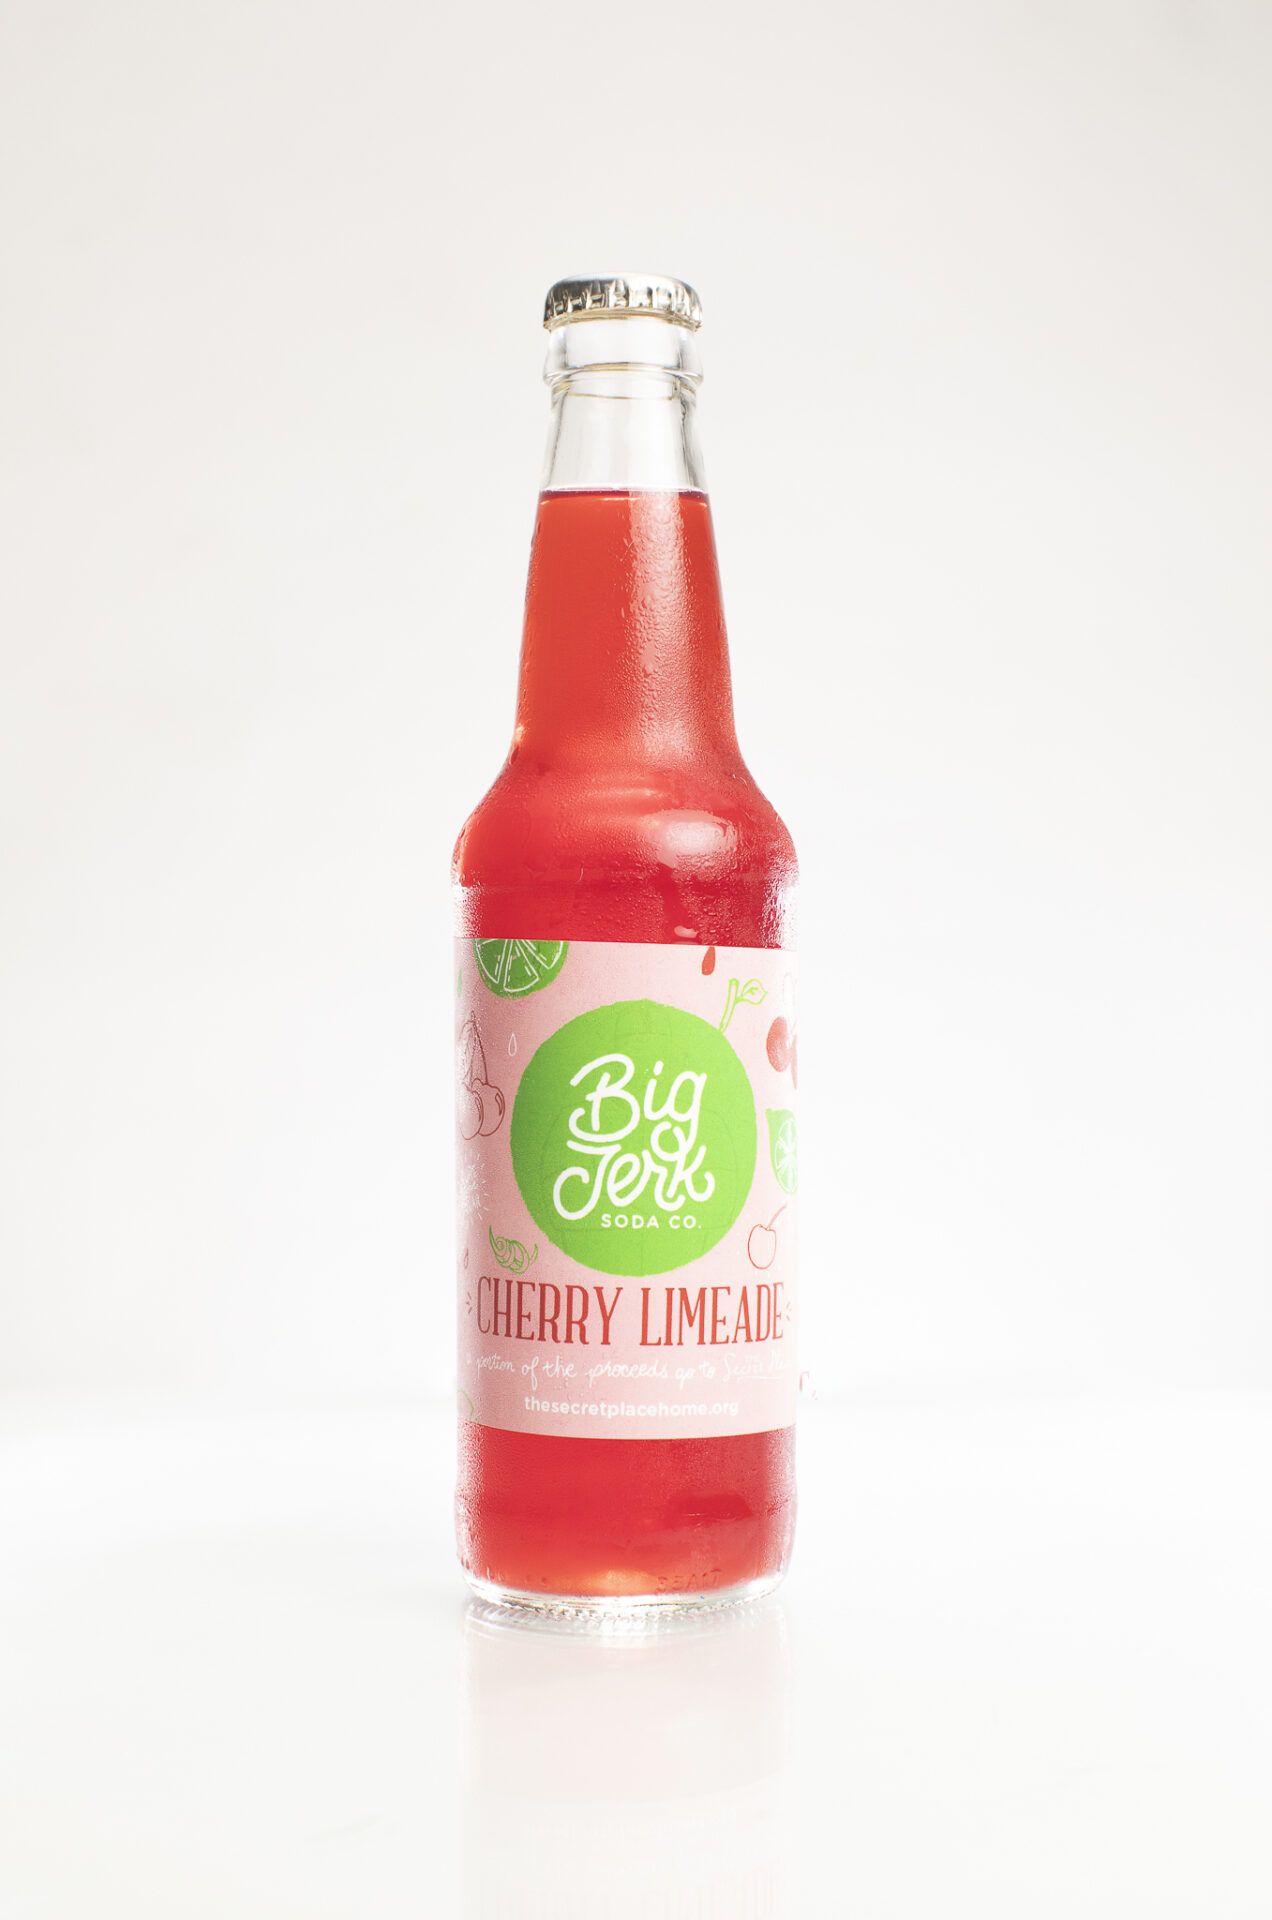 Big Jerk Soda Co. and the delicious Cherry Limeade featuring all natural juices and flavors.